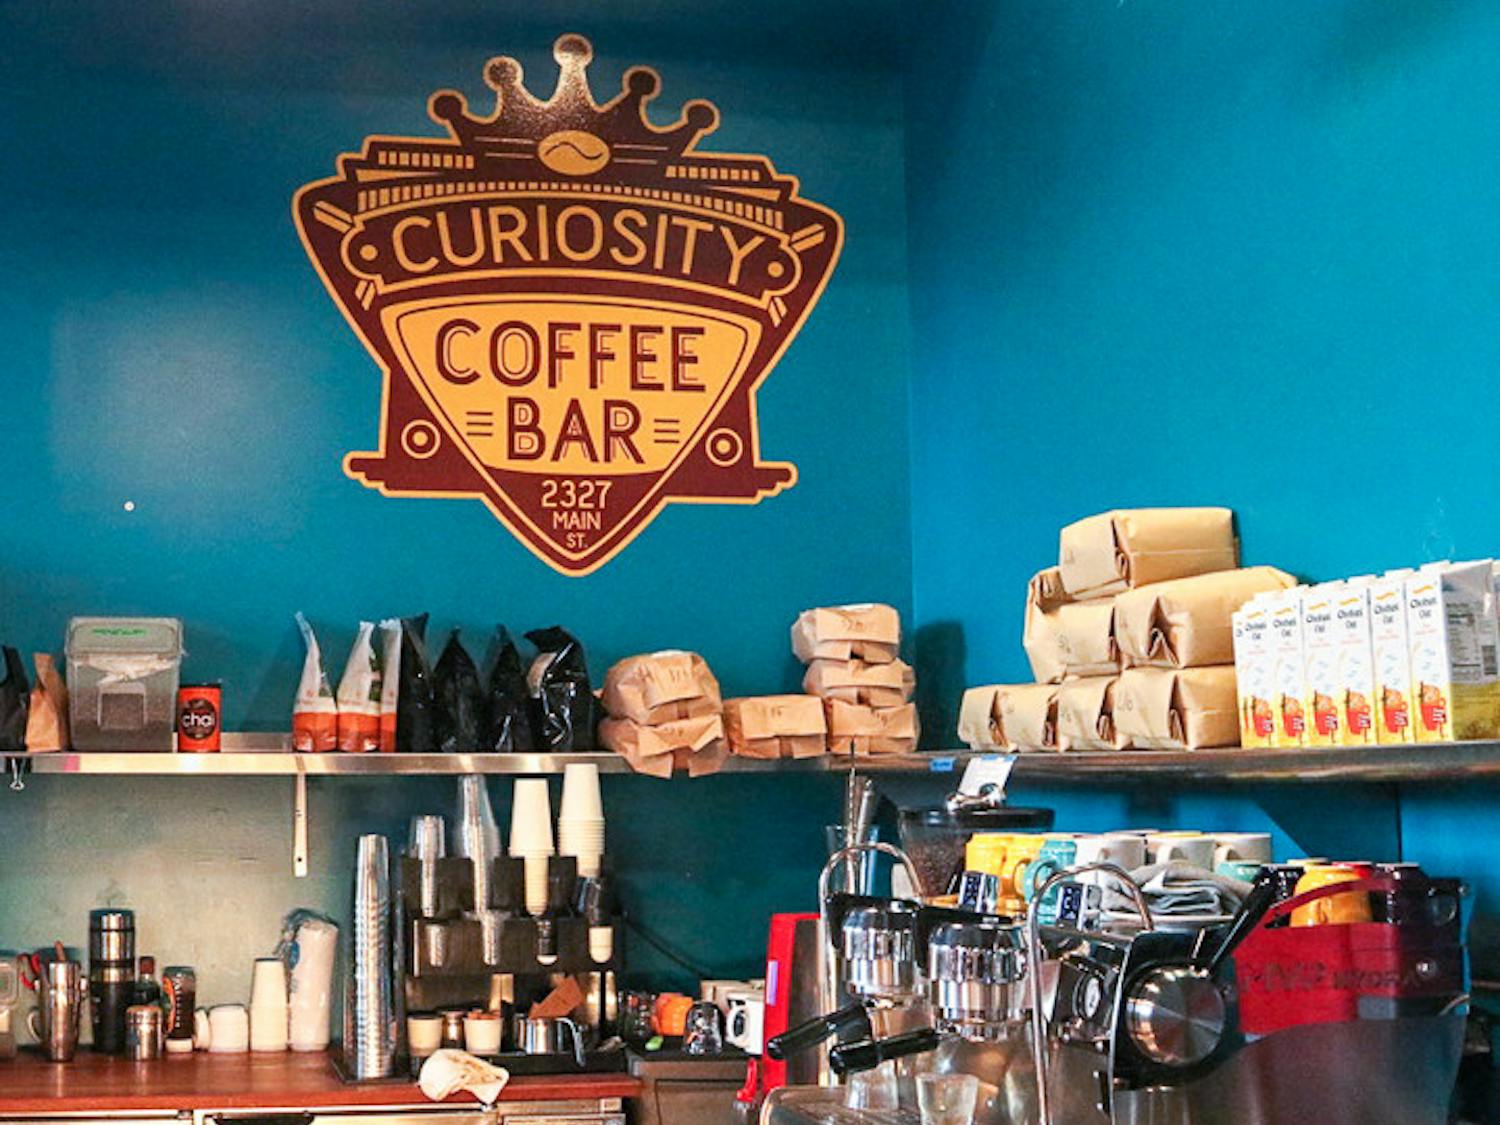 The Curiosity Coffee logo above the coffee bar inside the cafe. Curiosity coffee is located at 2727 Main Street in Columbia, SC.